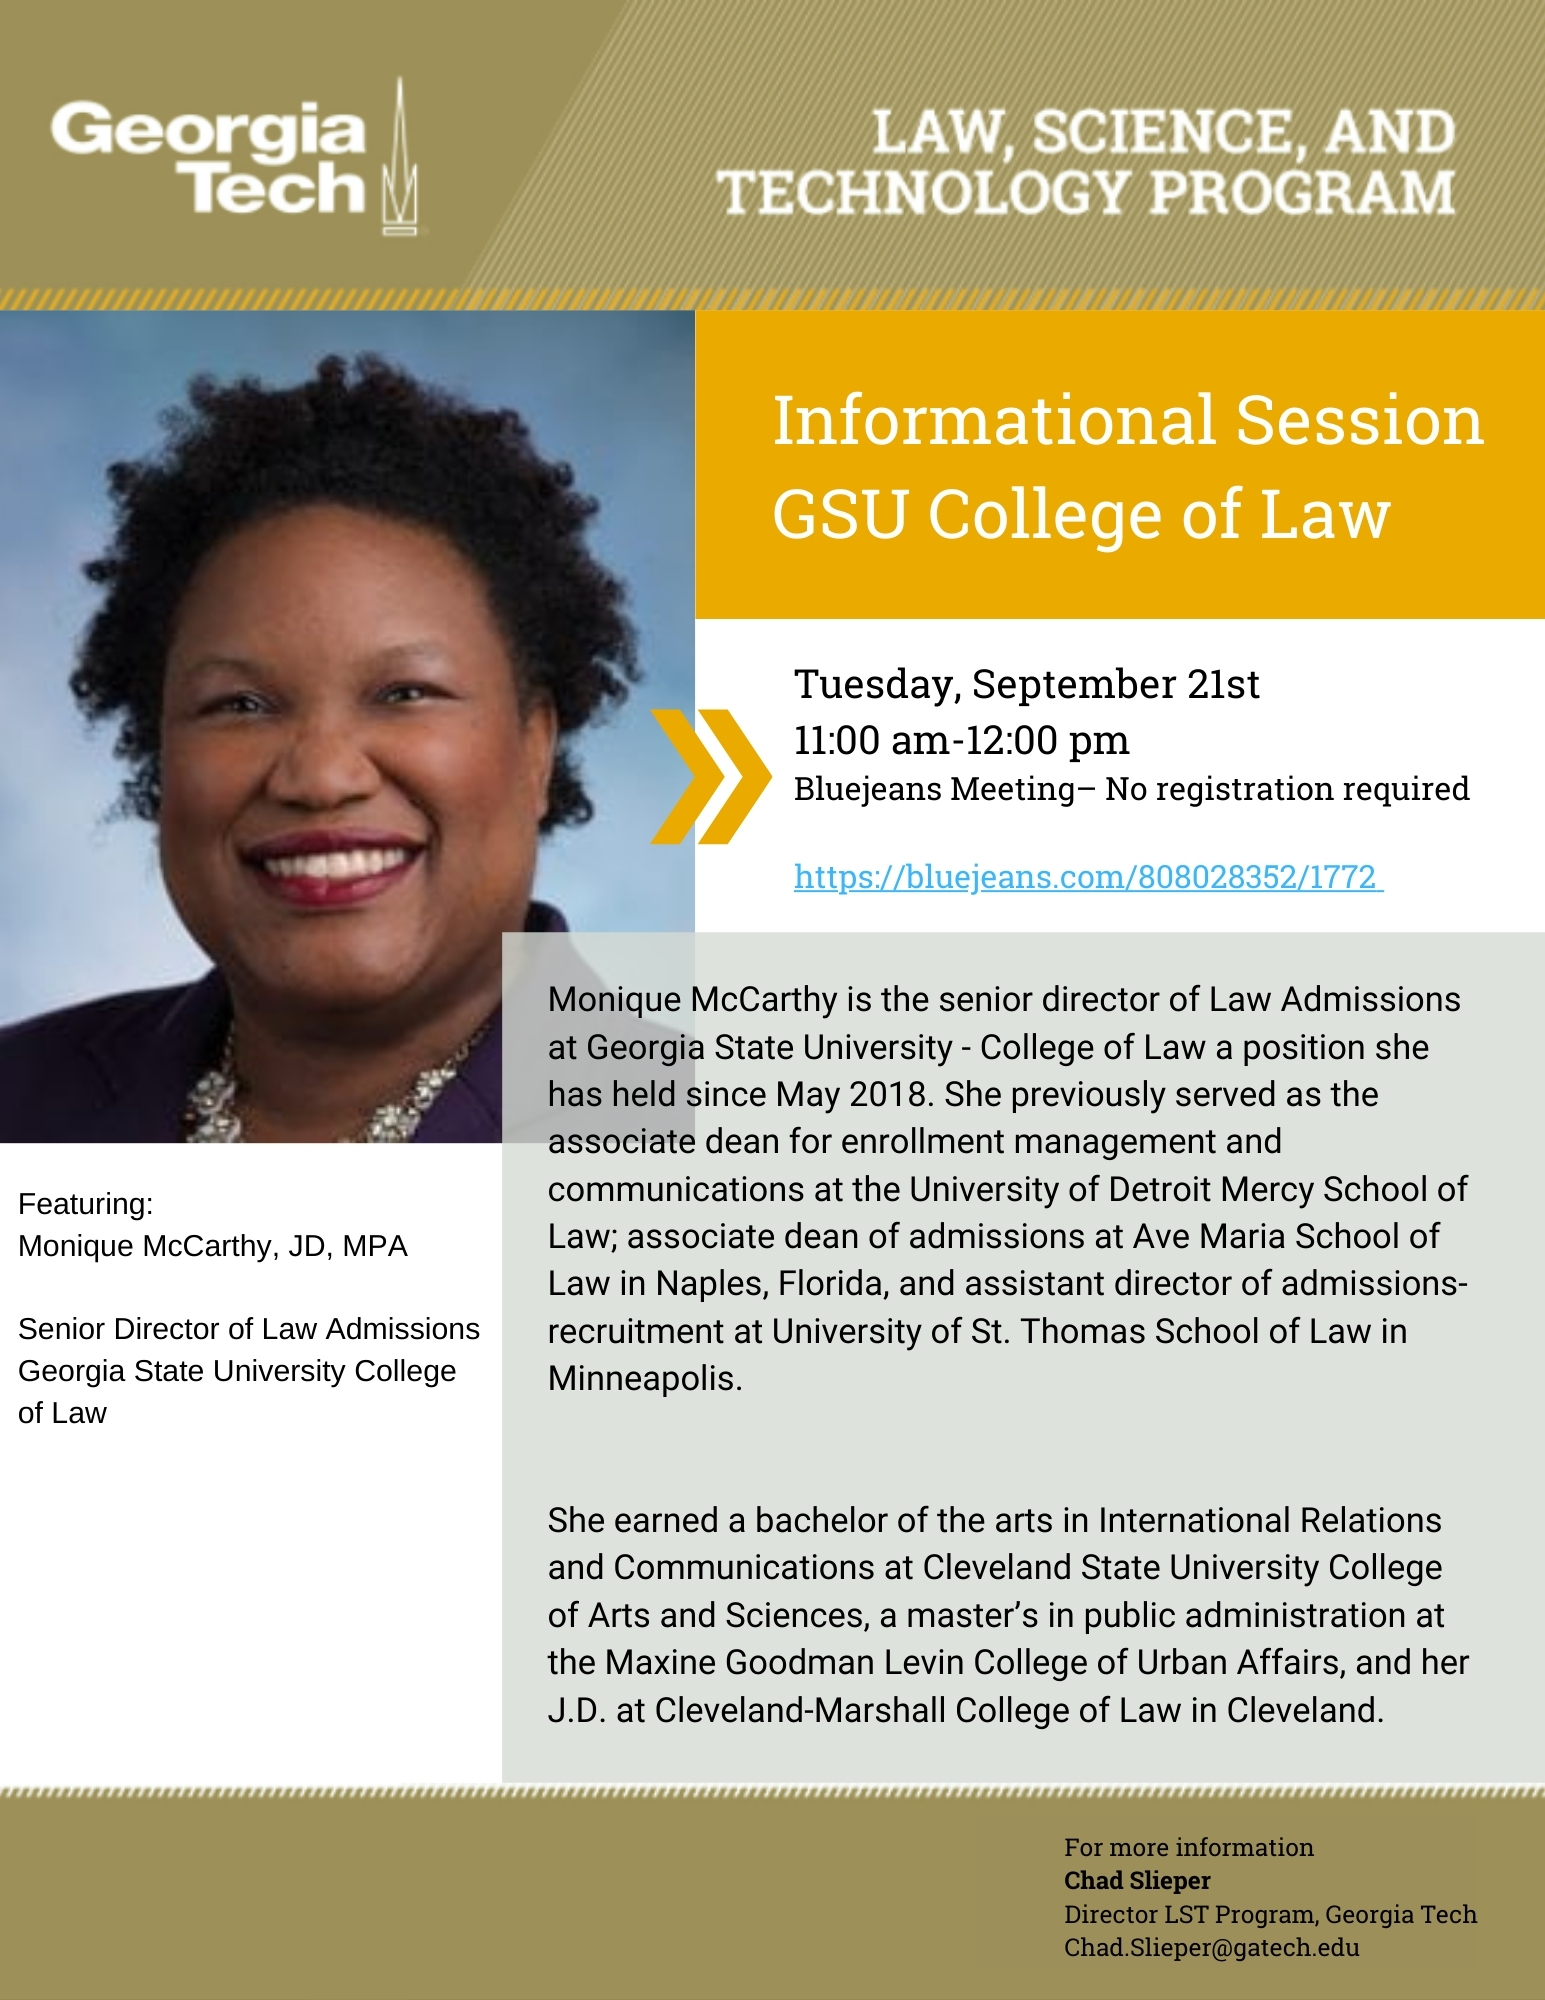 A flyer for a Georgia State University College of Law Info Session